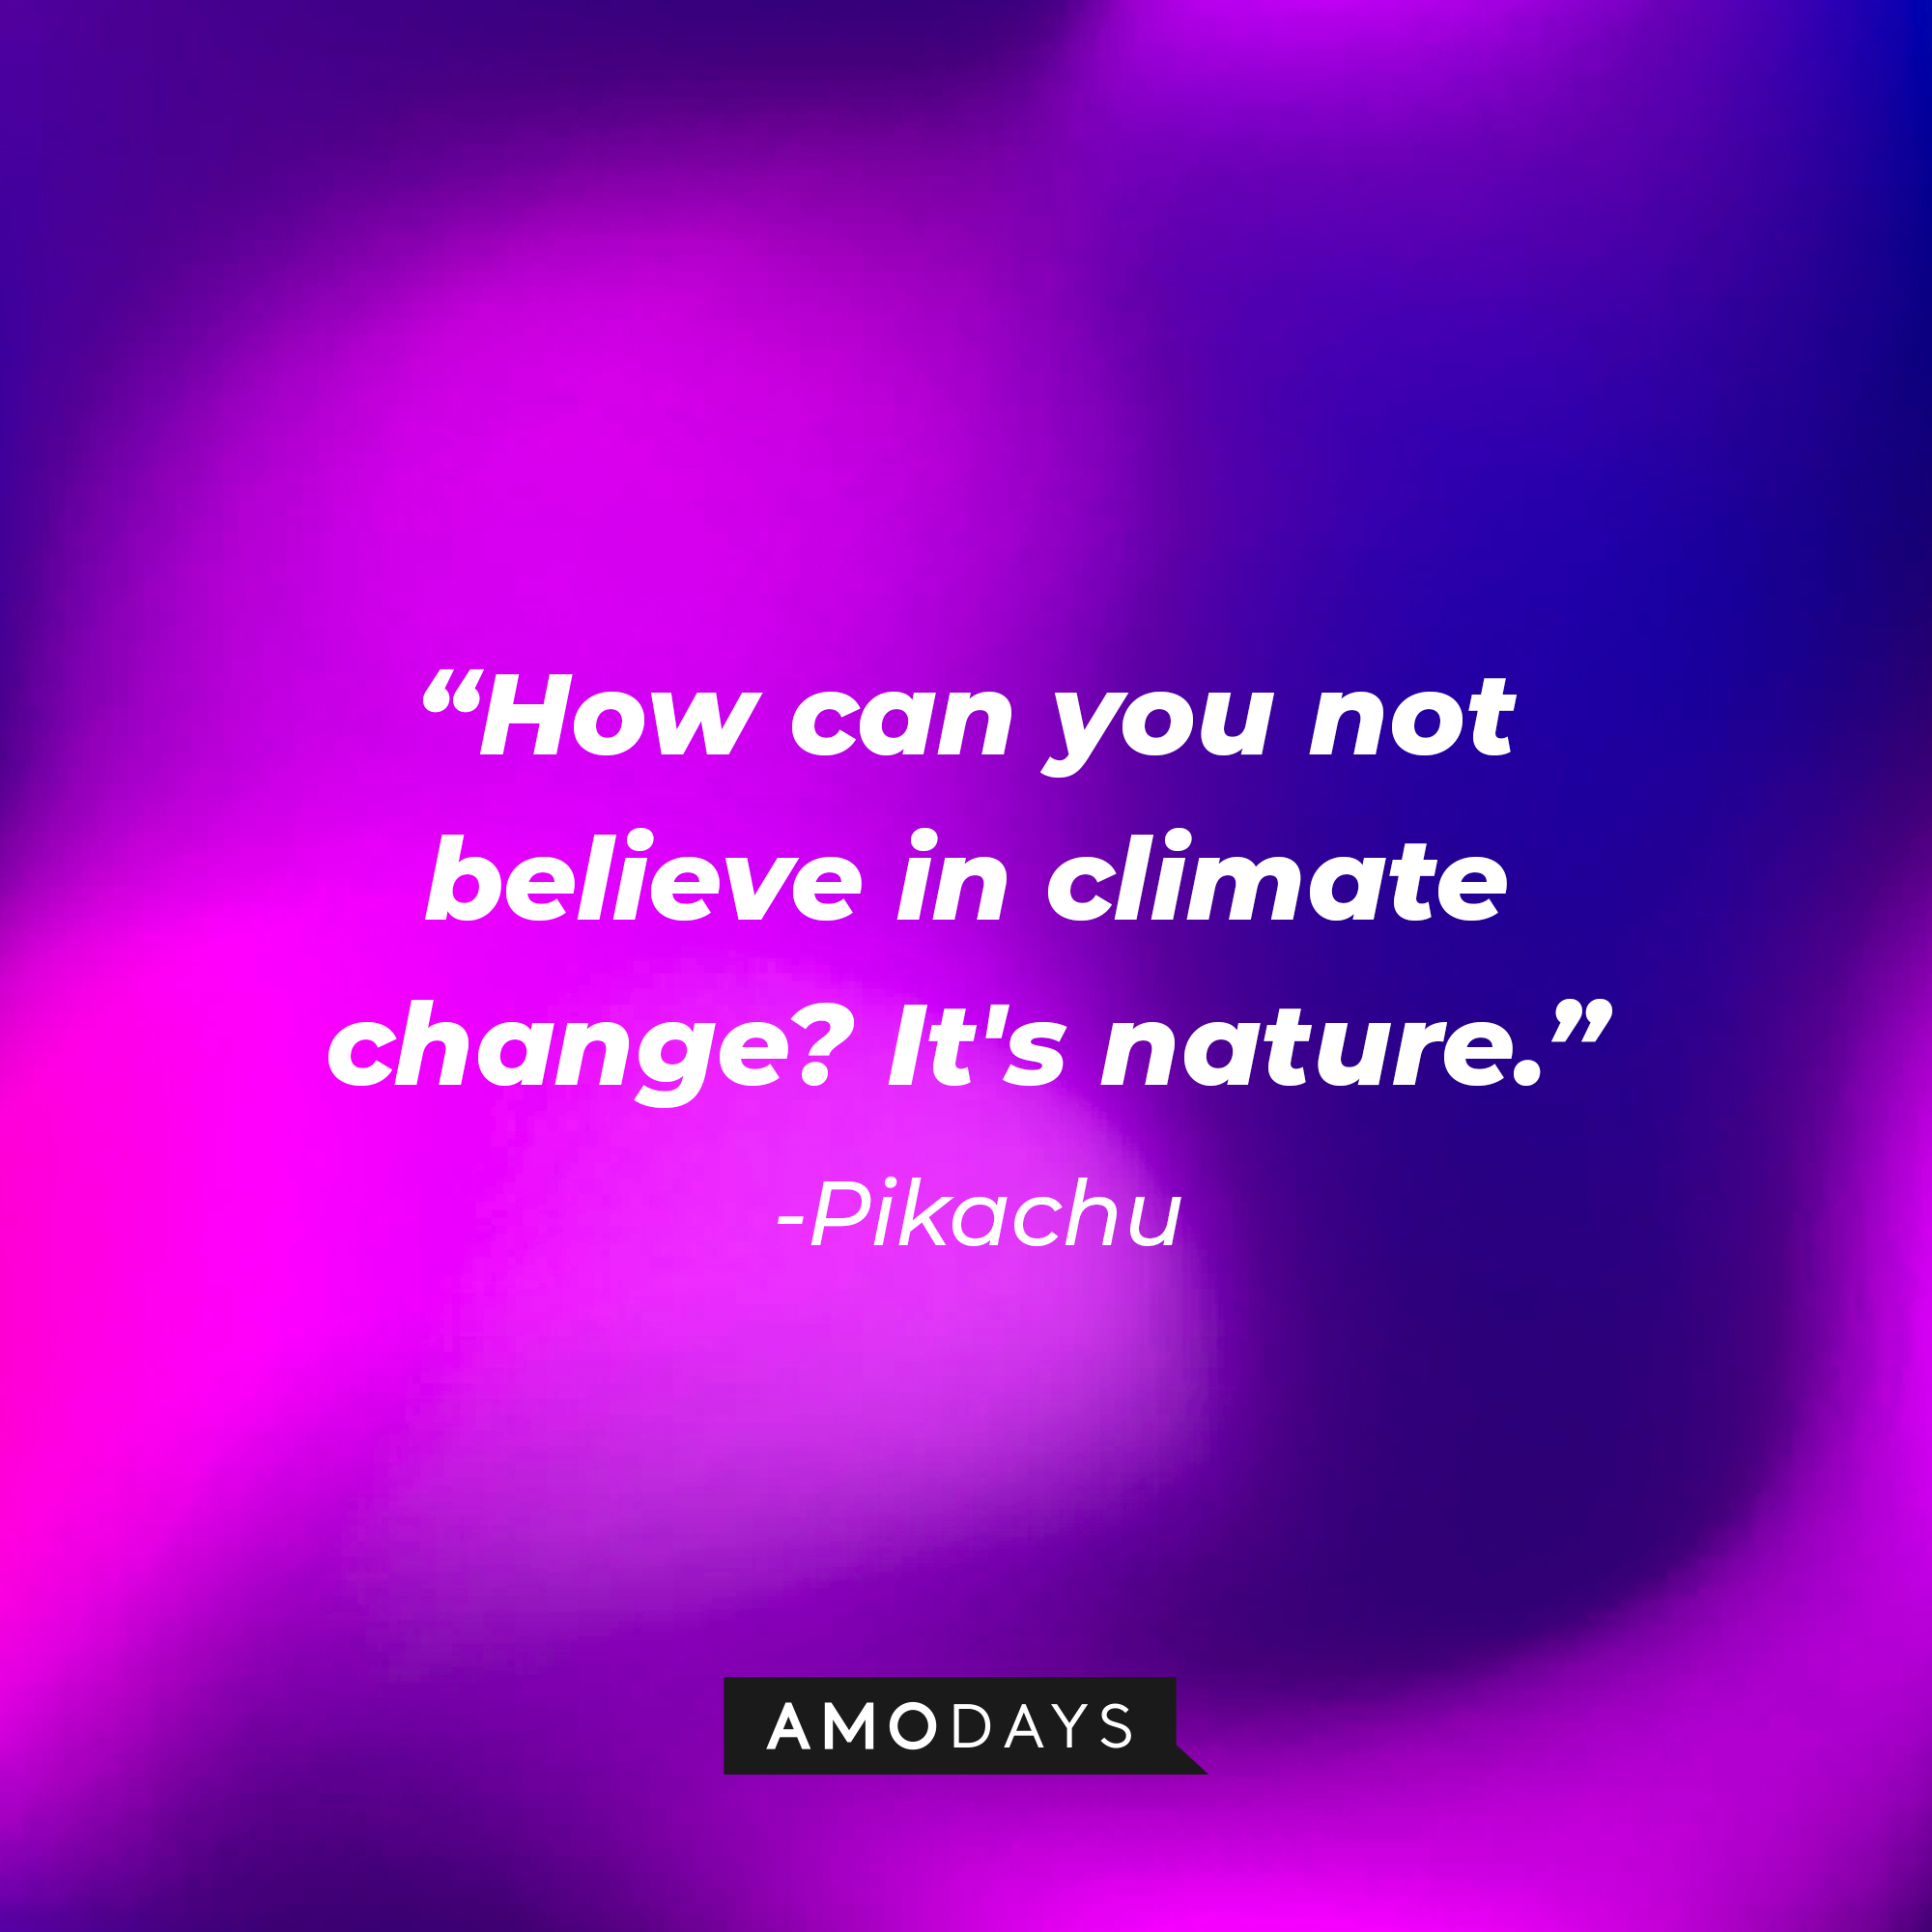 Pikachu's quote: "How can you not believe in climate change? It's nature." | Source: AmoDays